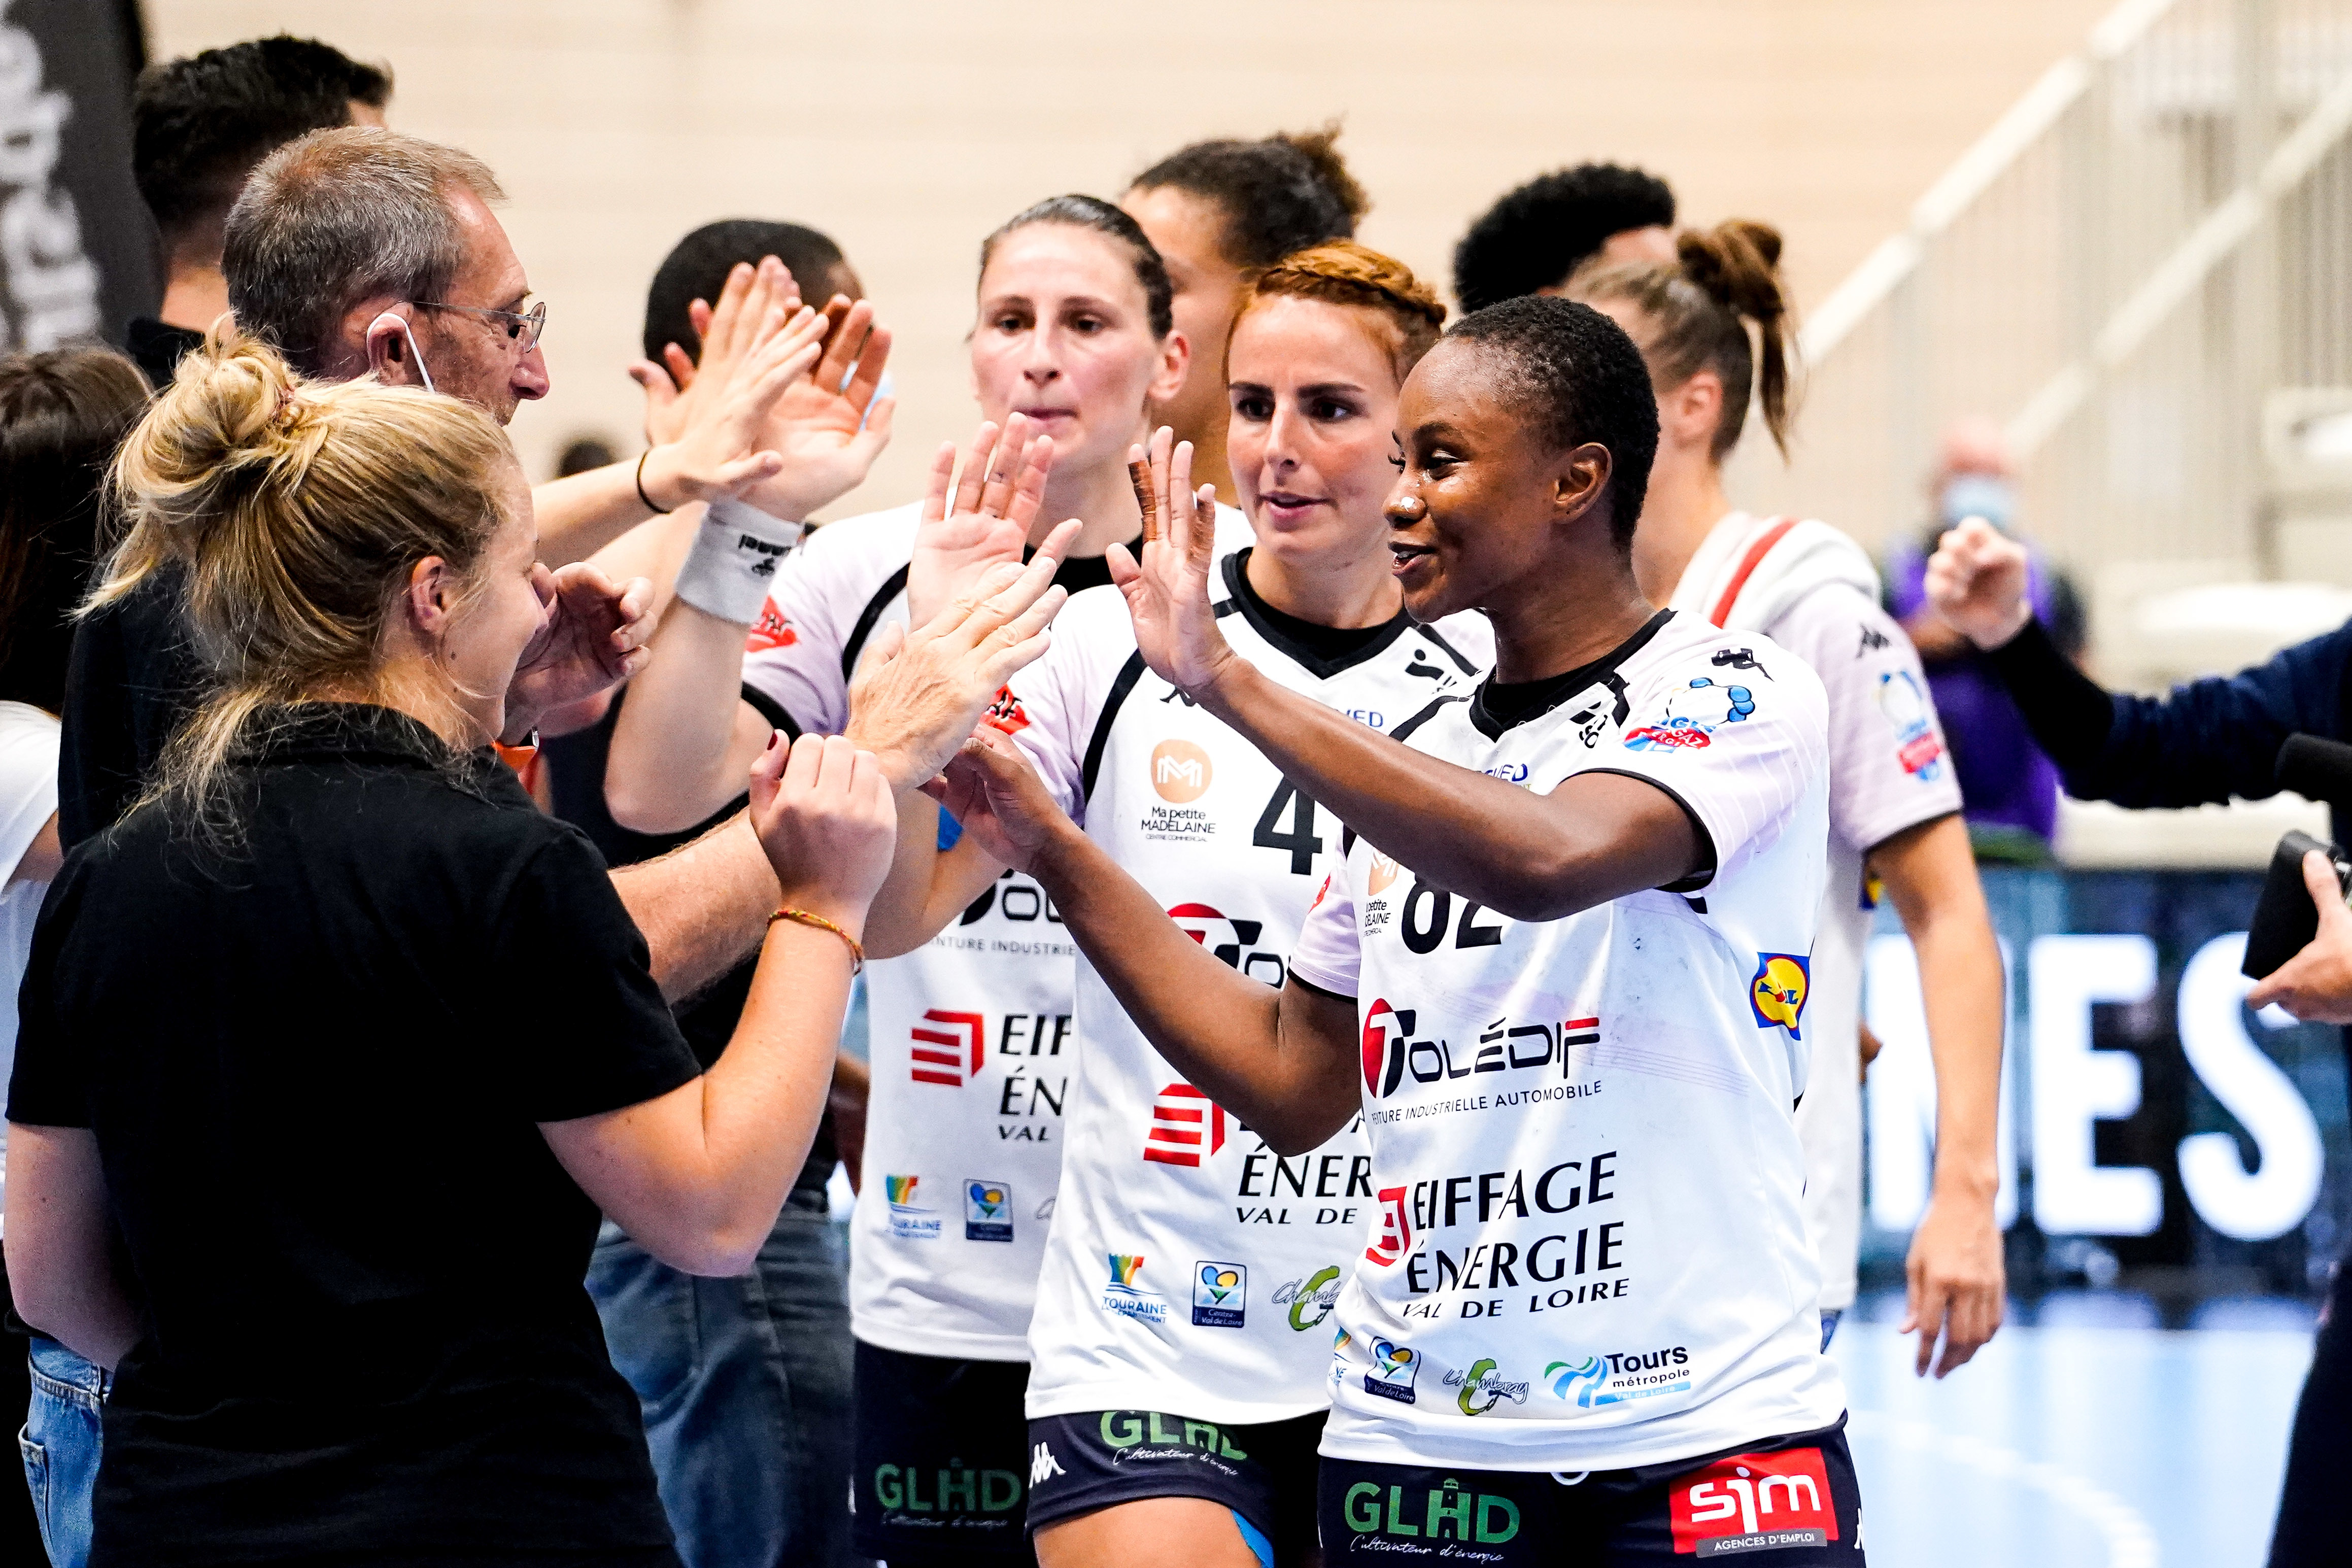 Djeneba TOURE of Chambray Touraine Handball (CTHB), Nina BRKLJACIC of Chambray Touraine Handball (CTHB) and Jovana STOILJKOVIC of Chambray Touraine Handball (CTHB) during the Ligue Butaguaz Energie match between Paris 92 and Chambray at Palais des Sports on September 8, 2021 in Paris, France. (Photo by Hugo Pfeiffer/Icon Sport) - Palais des Sports Robert Charpentier - Issy-les-Moulineaux (France)